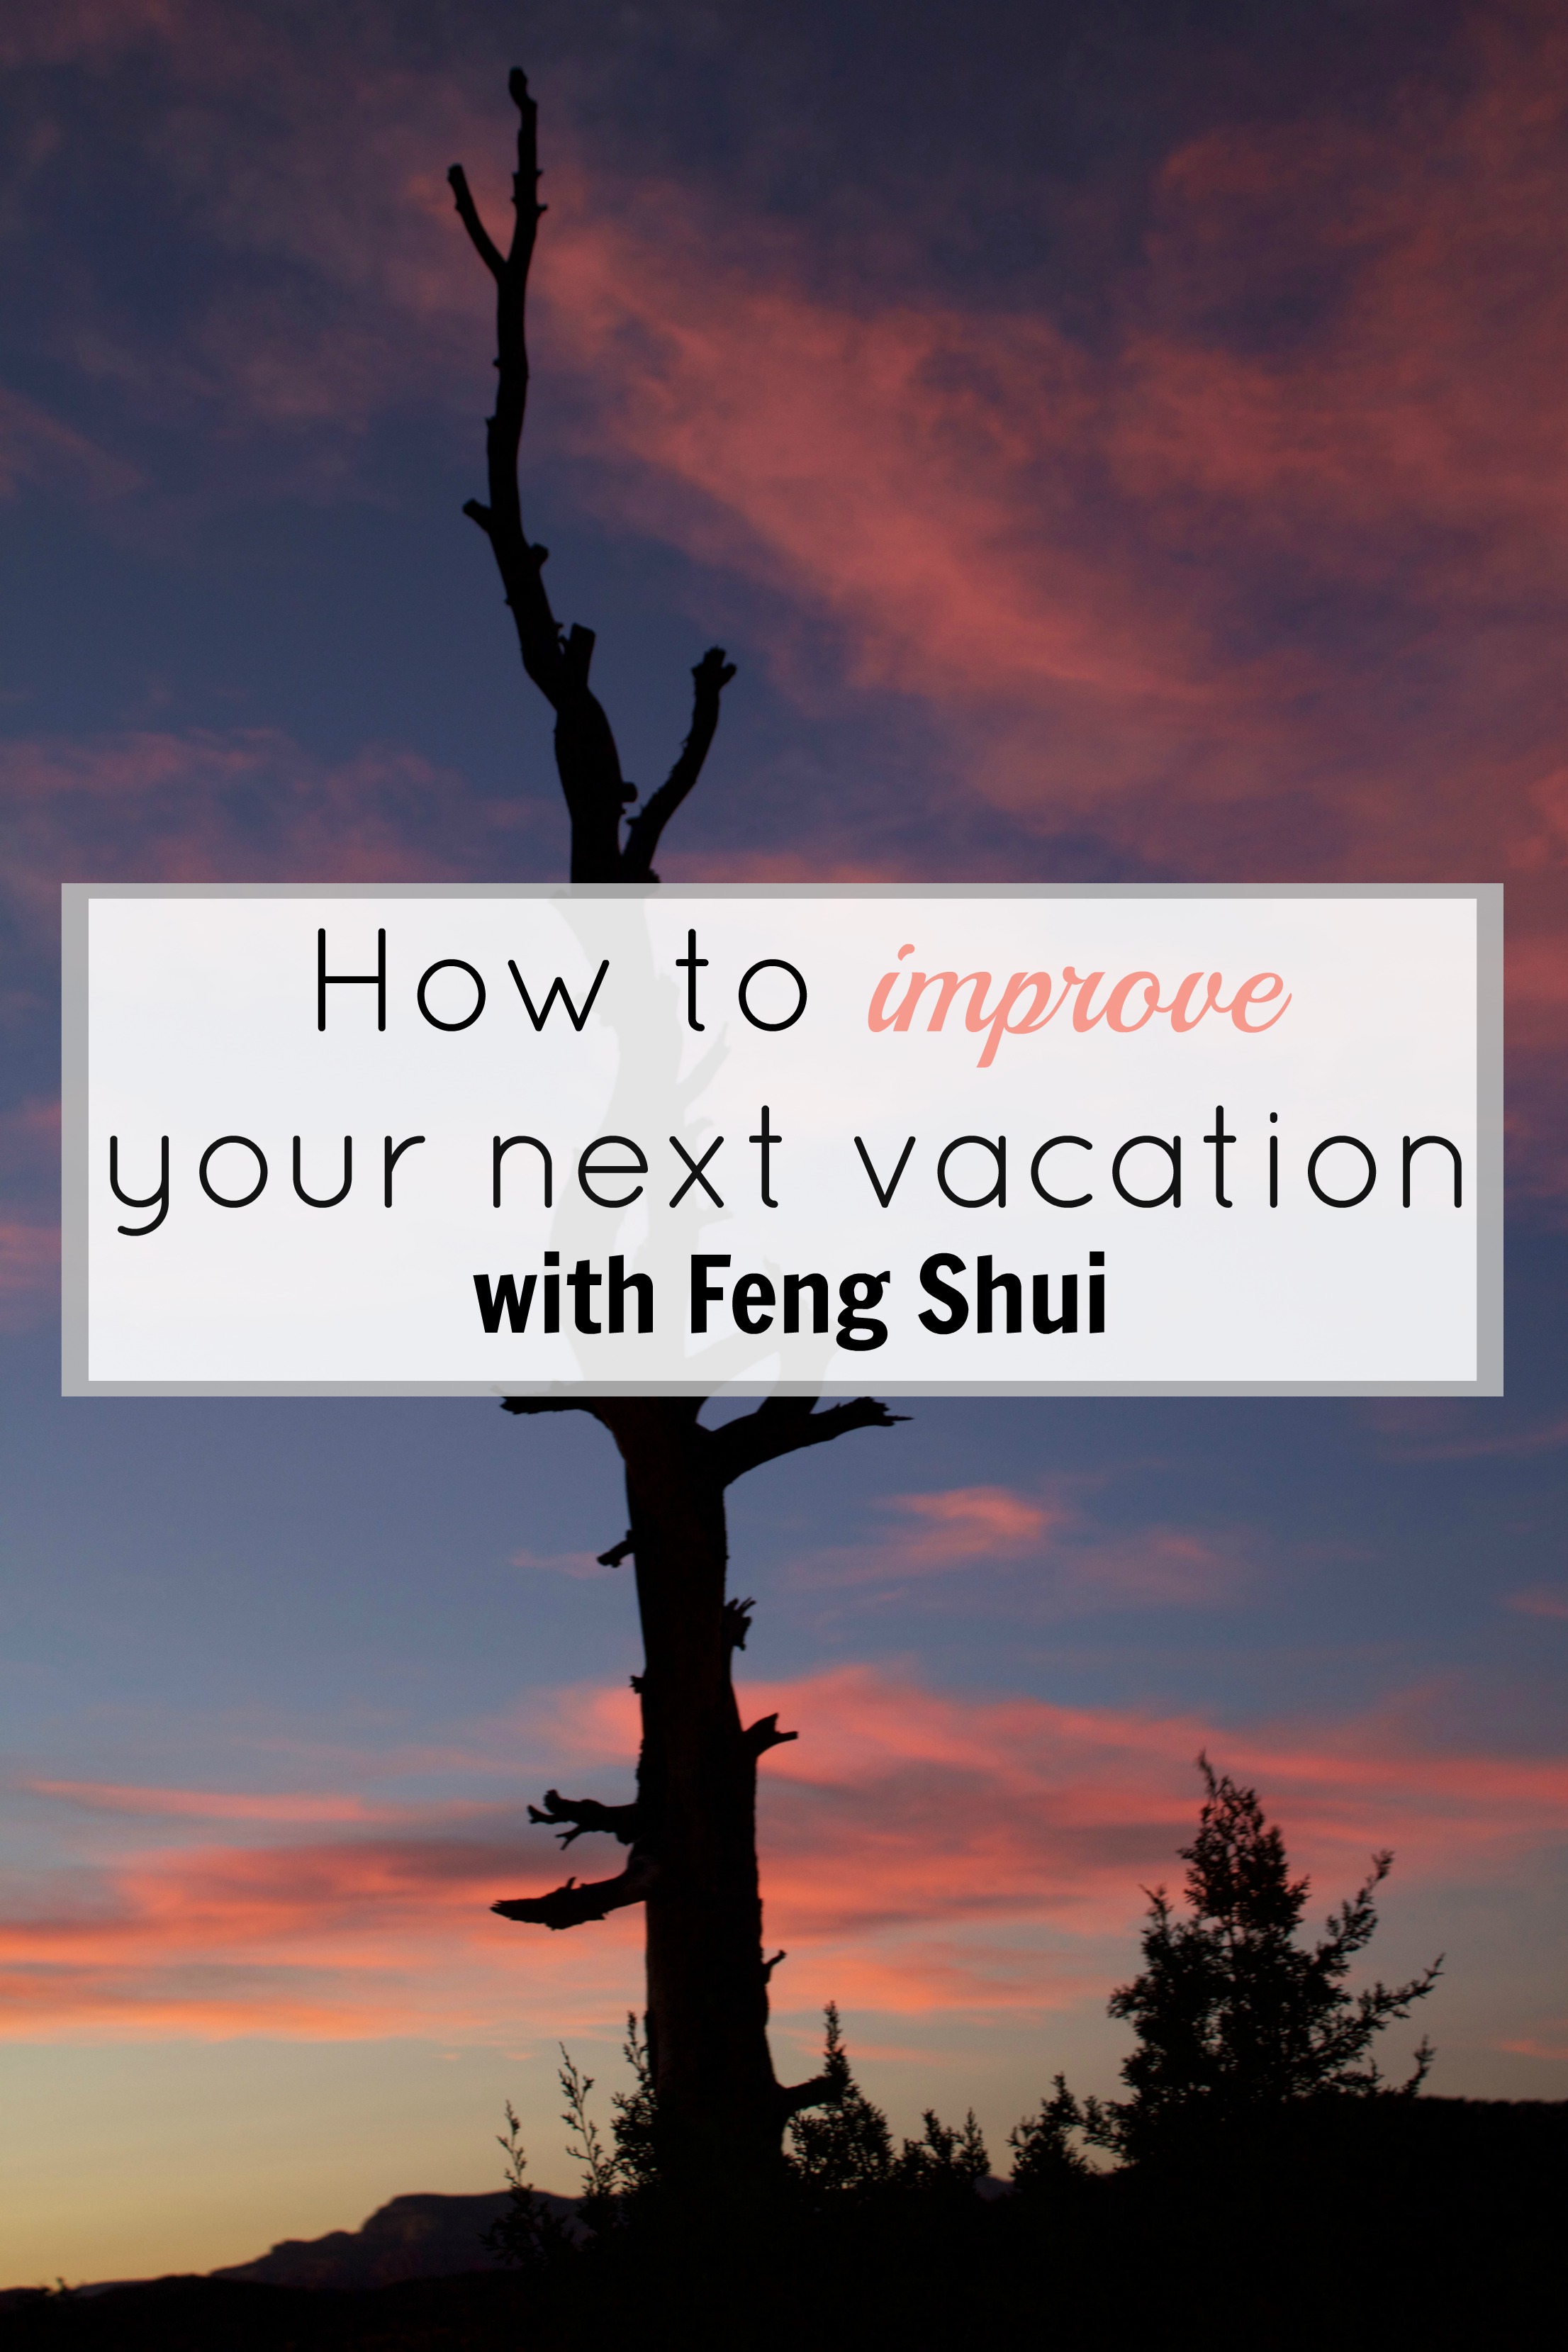 How to improve your next trip with Feng Shui